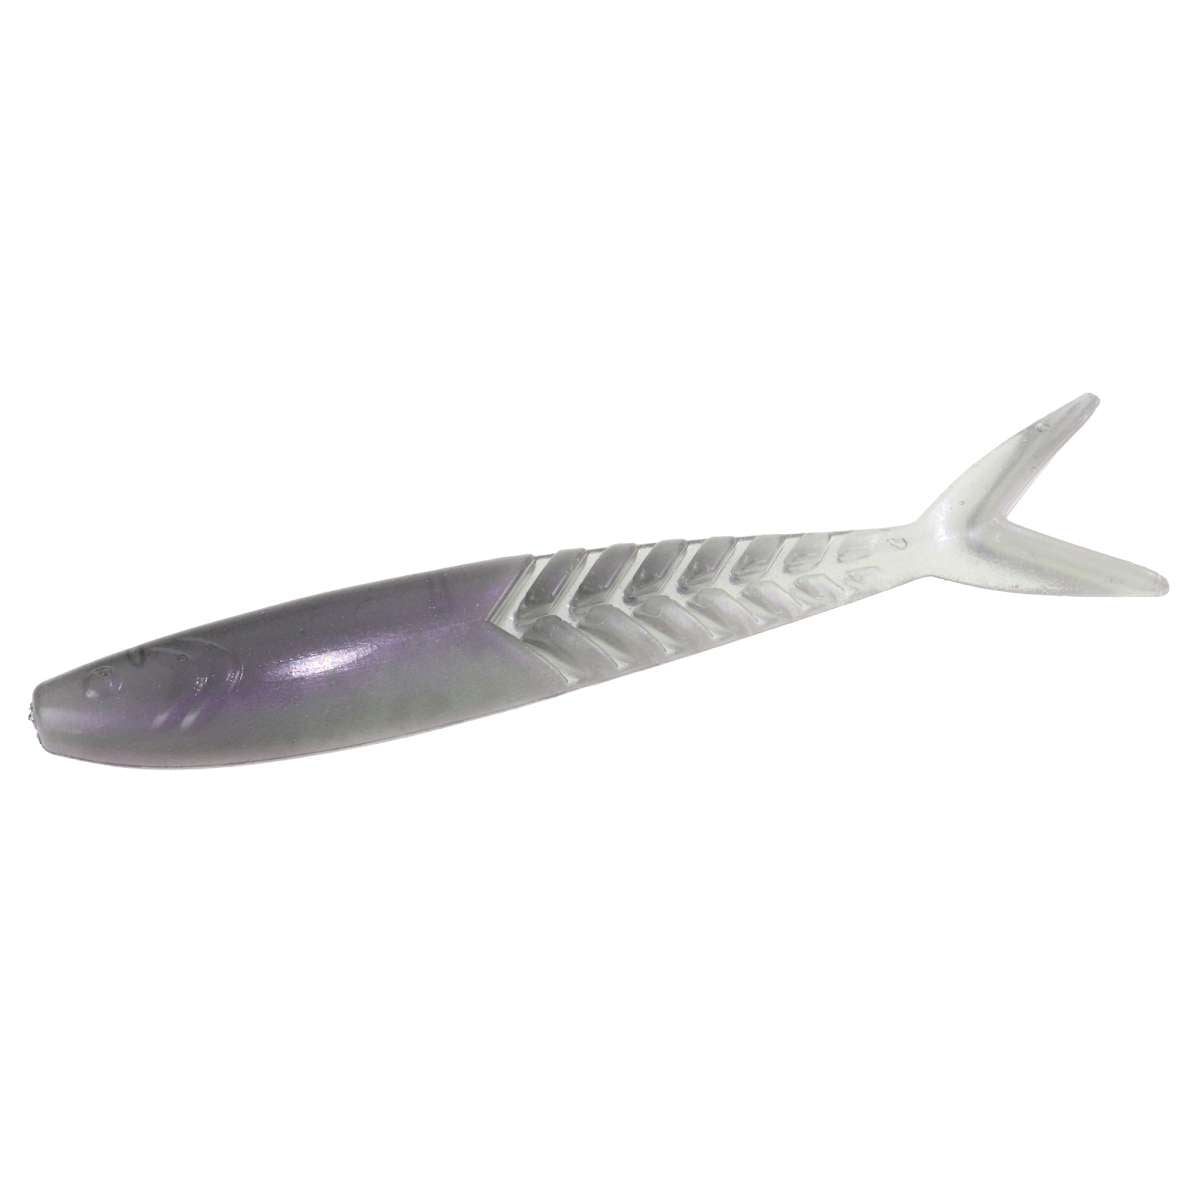 Zoom Shimmer Shad